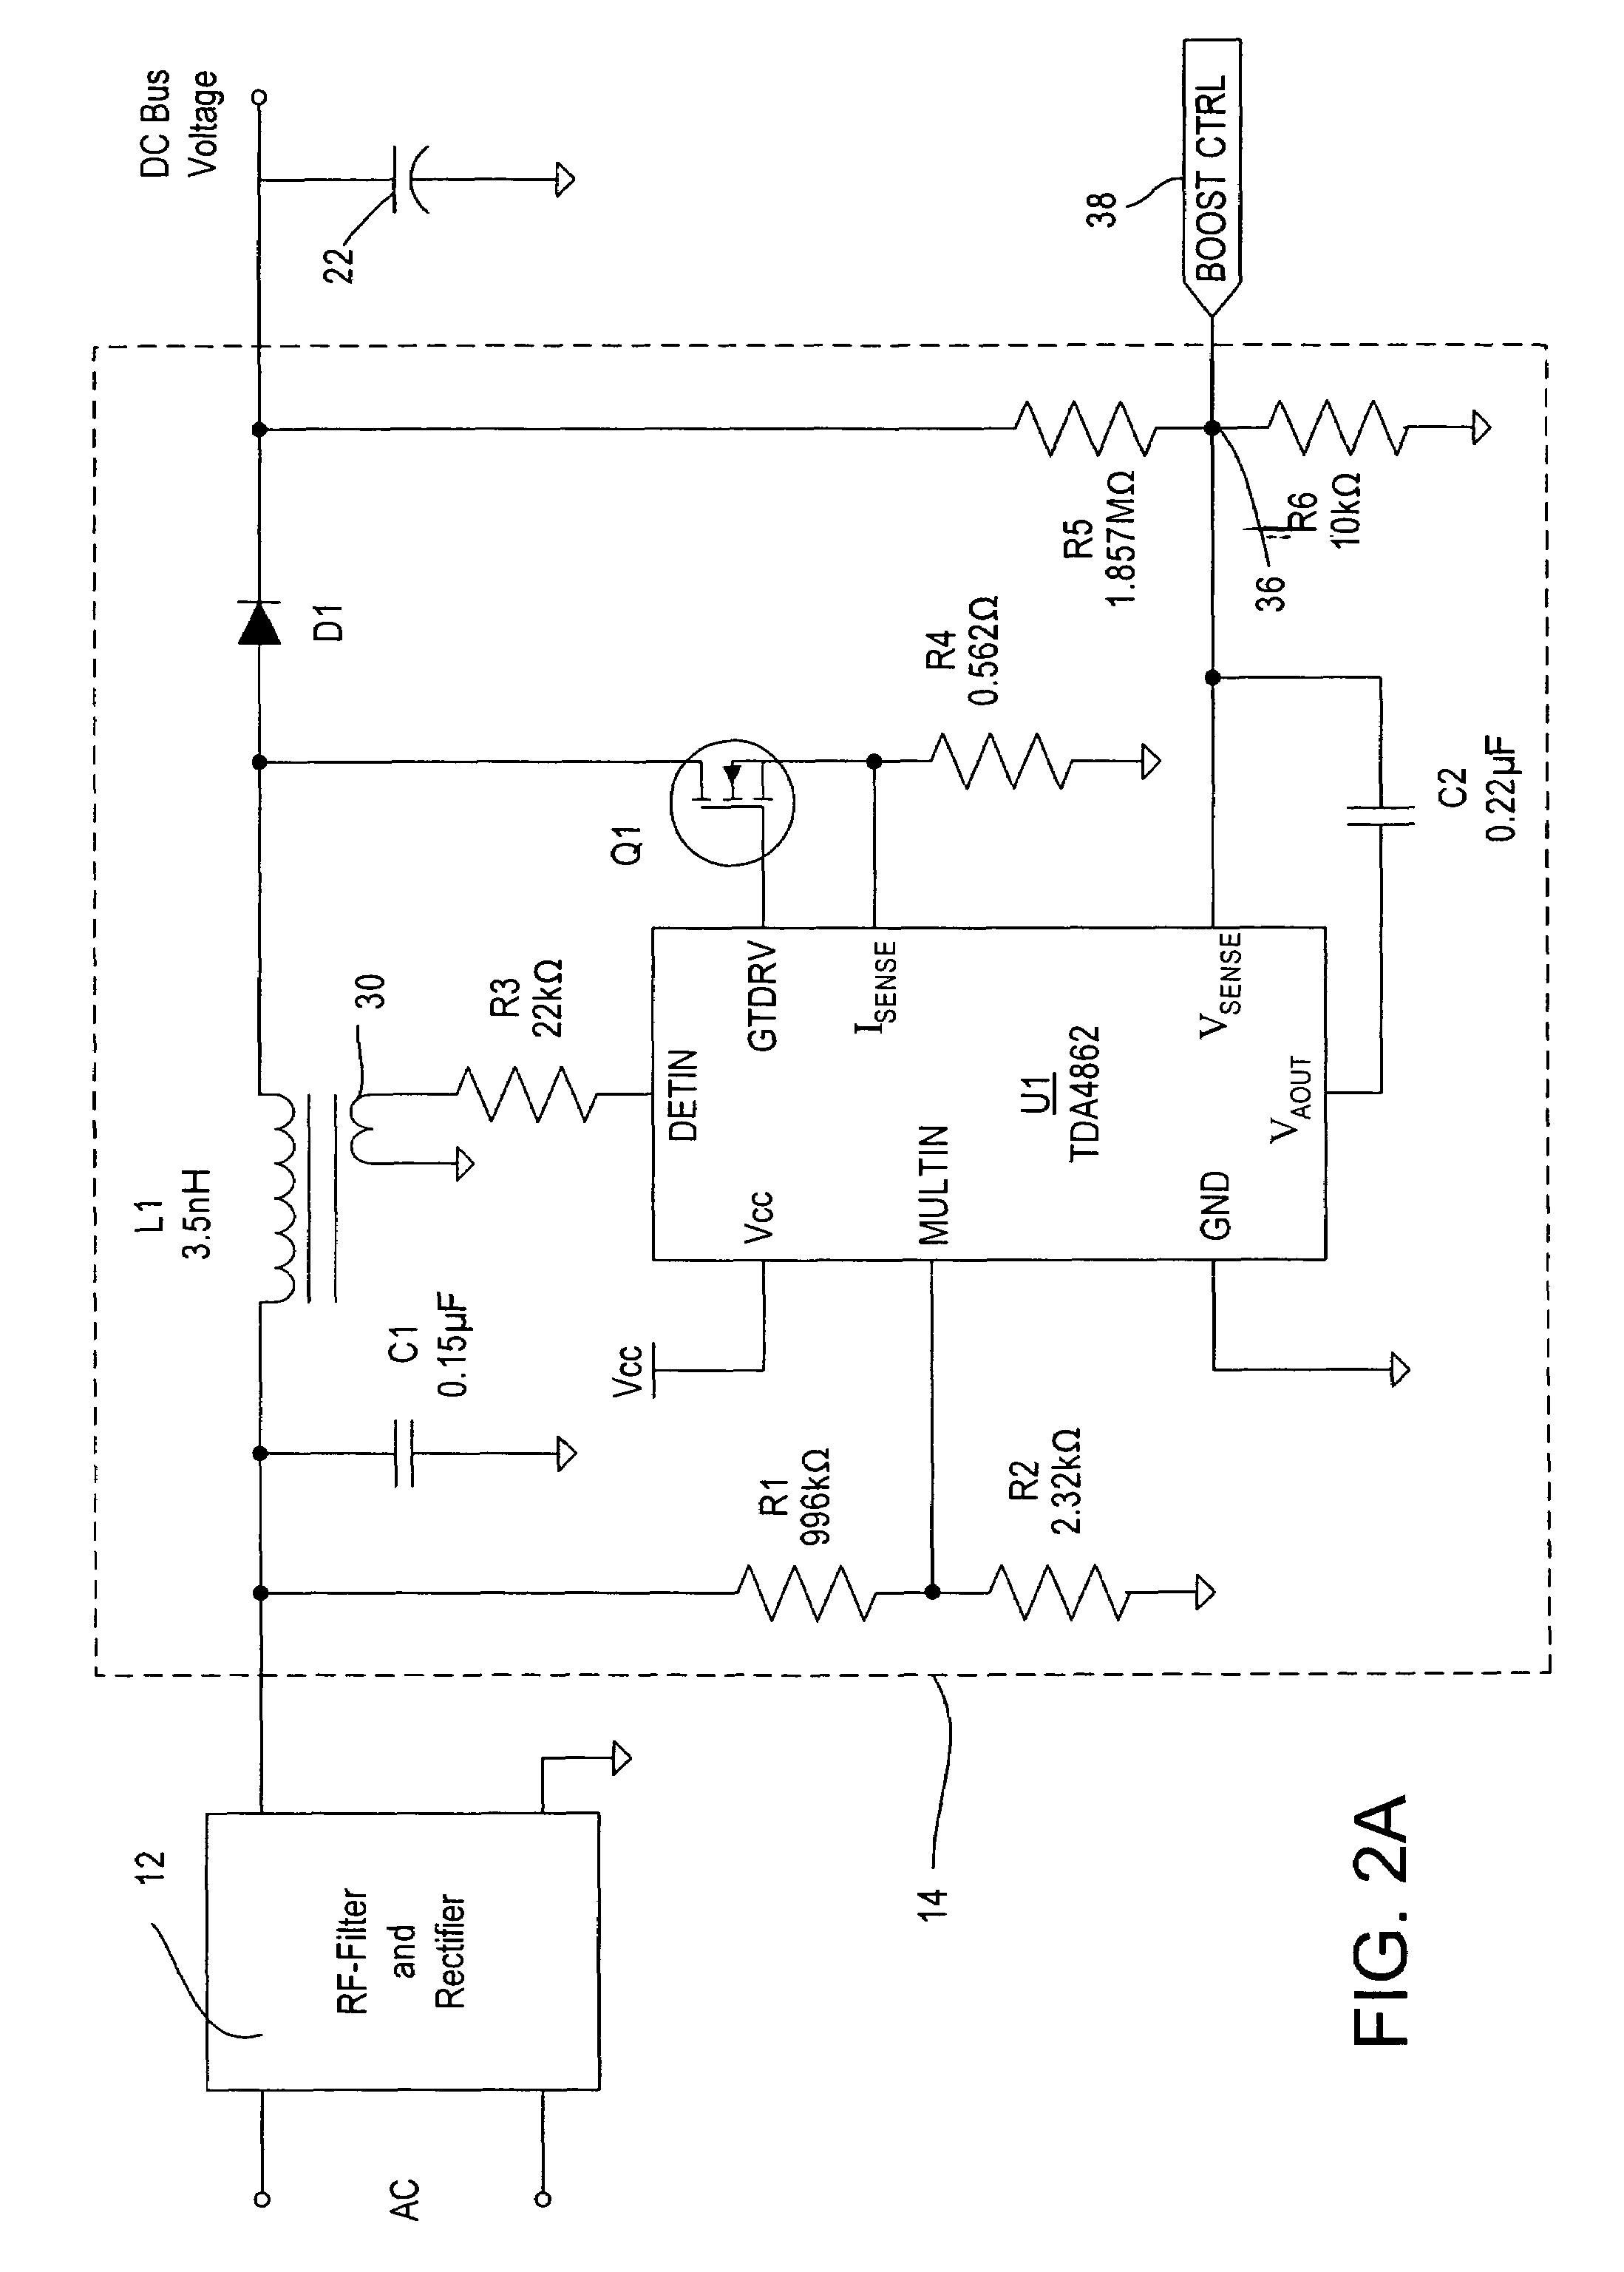 Lighting ballast having boost converter with on/off control and method of ballast operation